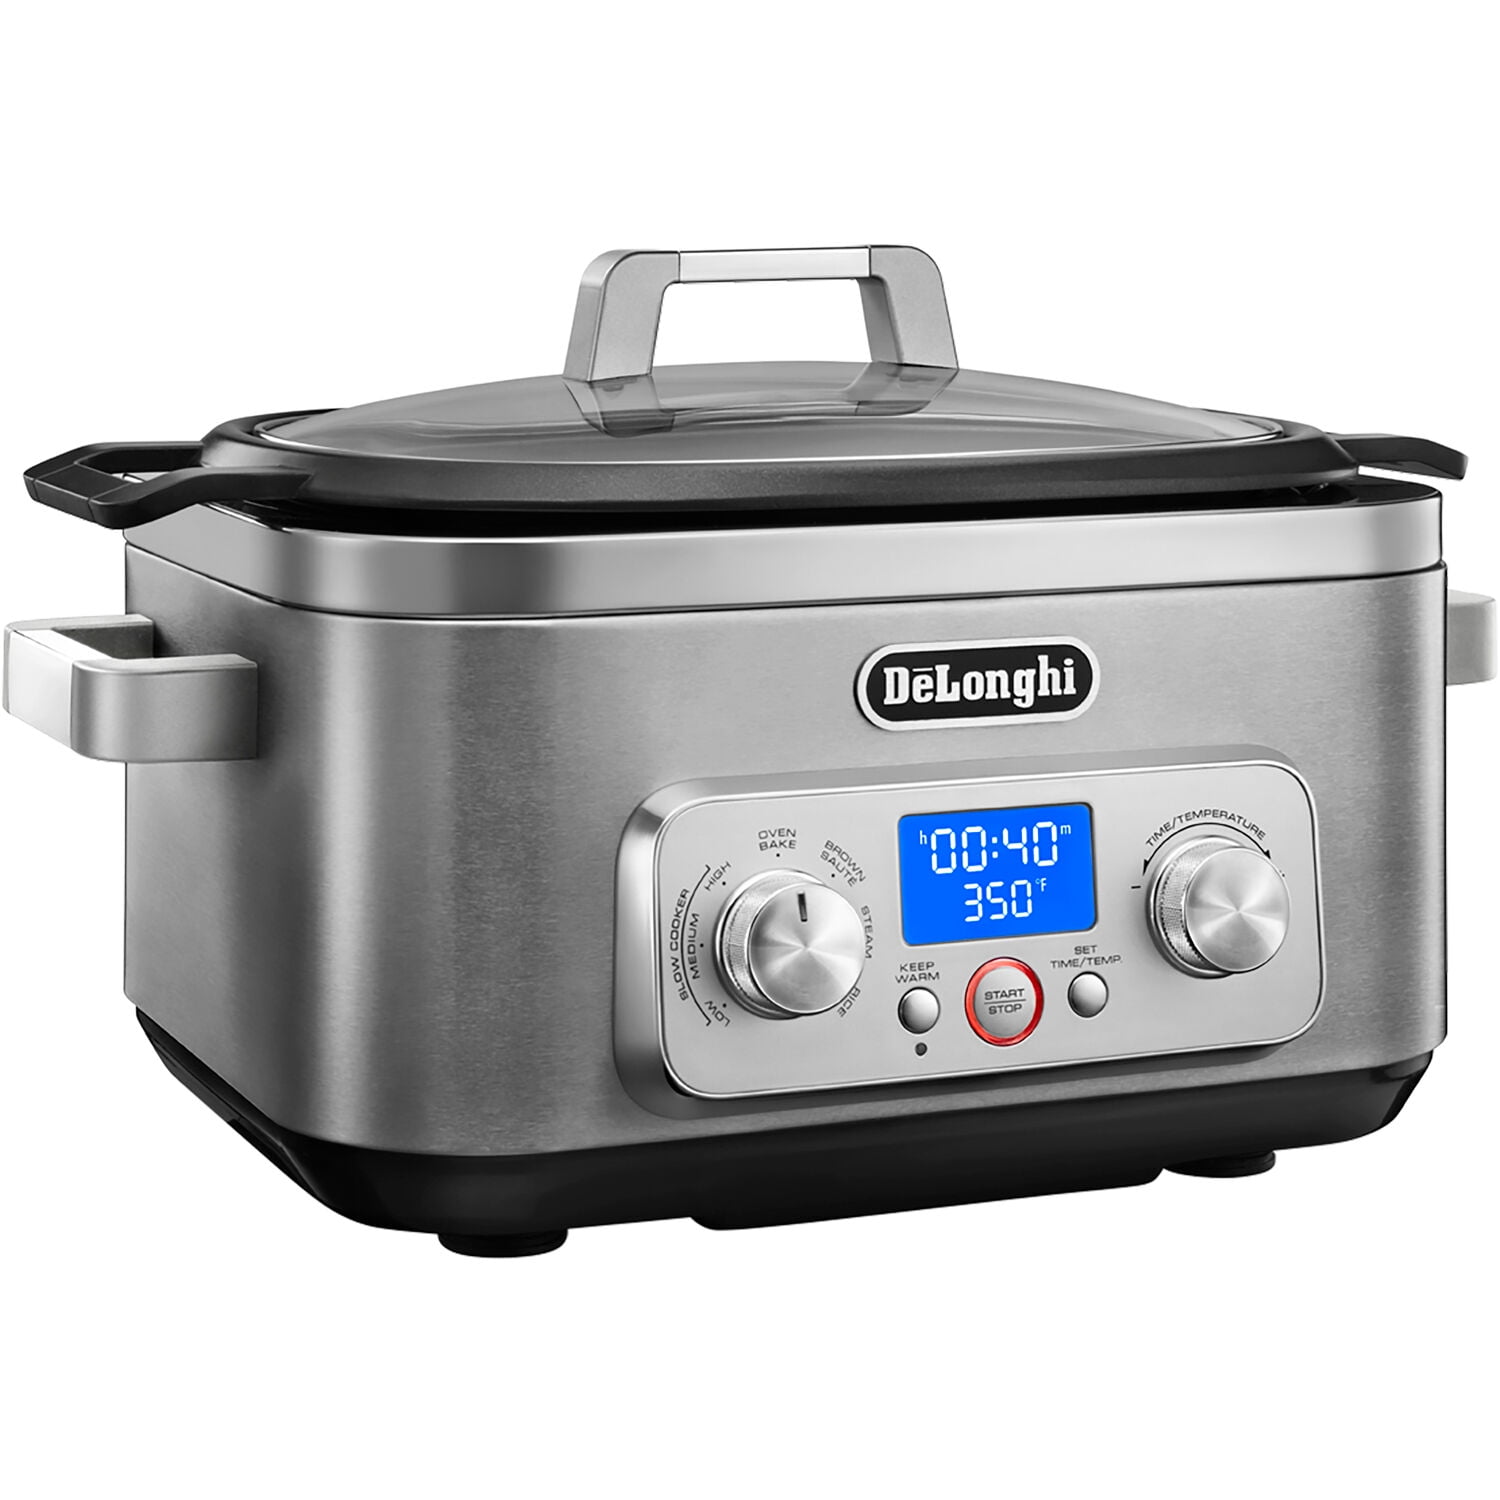 De'Longhi Livenza 7-in-1 Multi-Cooker Programmable SlowCooker, Bake, Brown,  Saute, Rice, Steamer & Warmer, Easy to Use and Clean, Nonstick Dishwasher  Safe Pot, (6-Quart) & Reviews